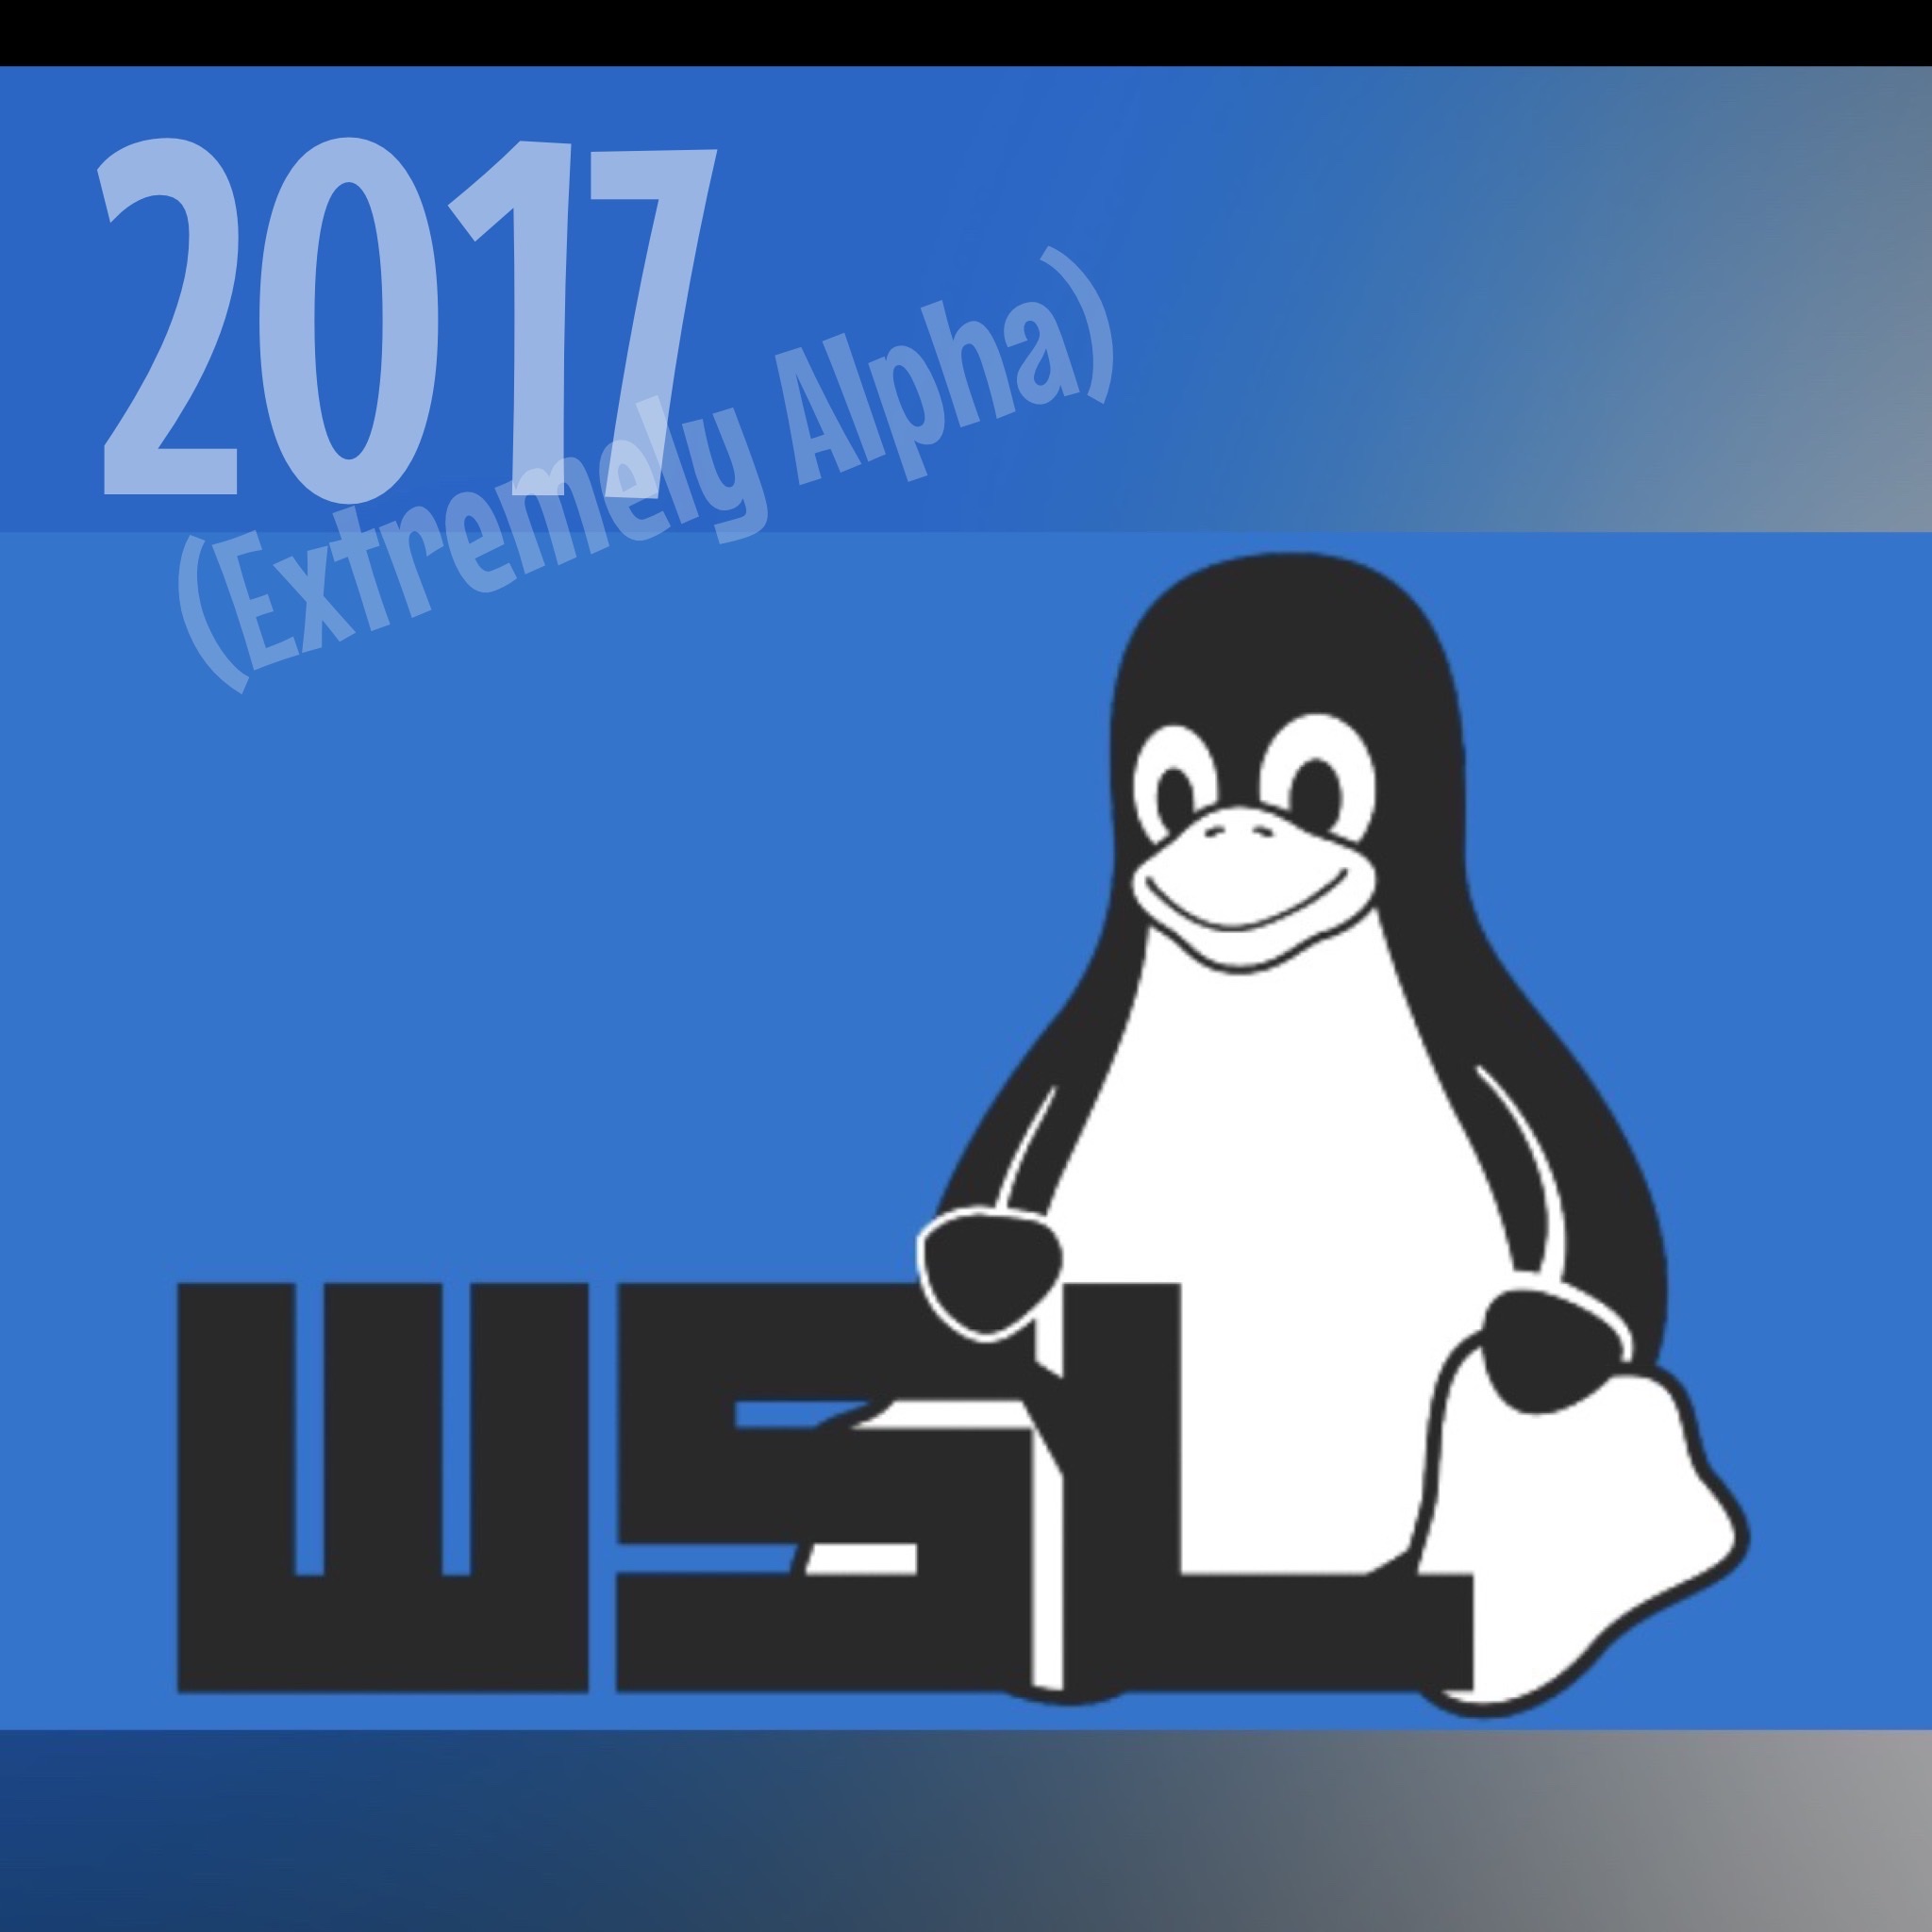 Windows Subsystem for Linux WSL 2017